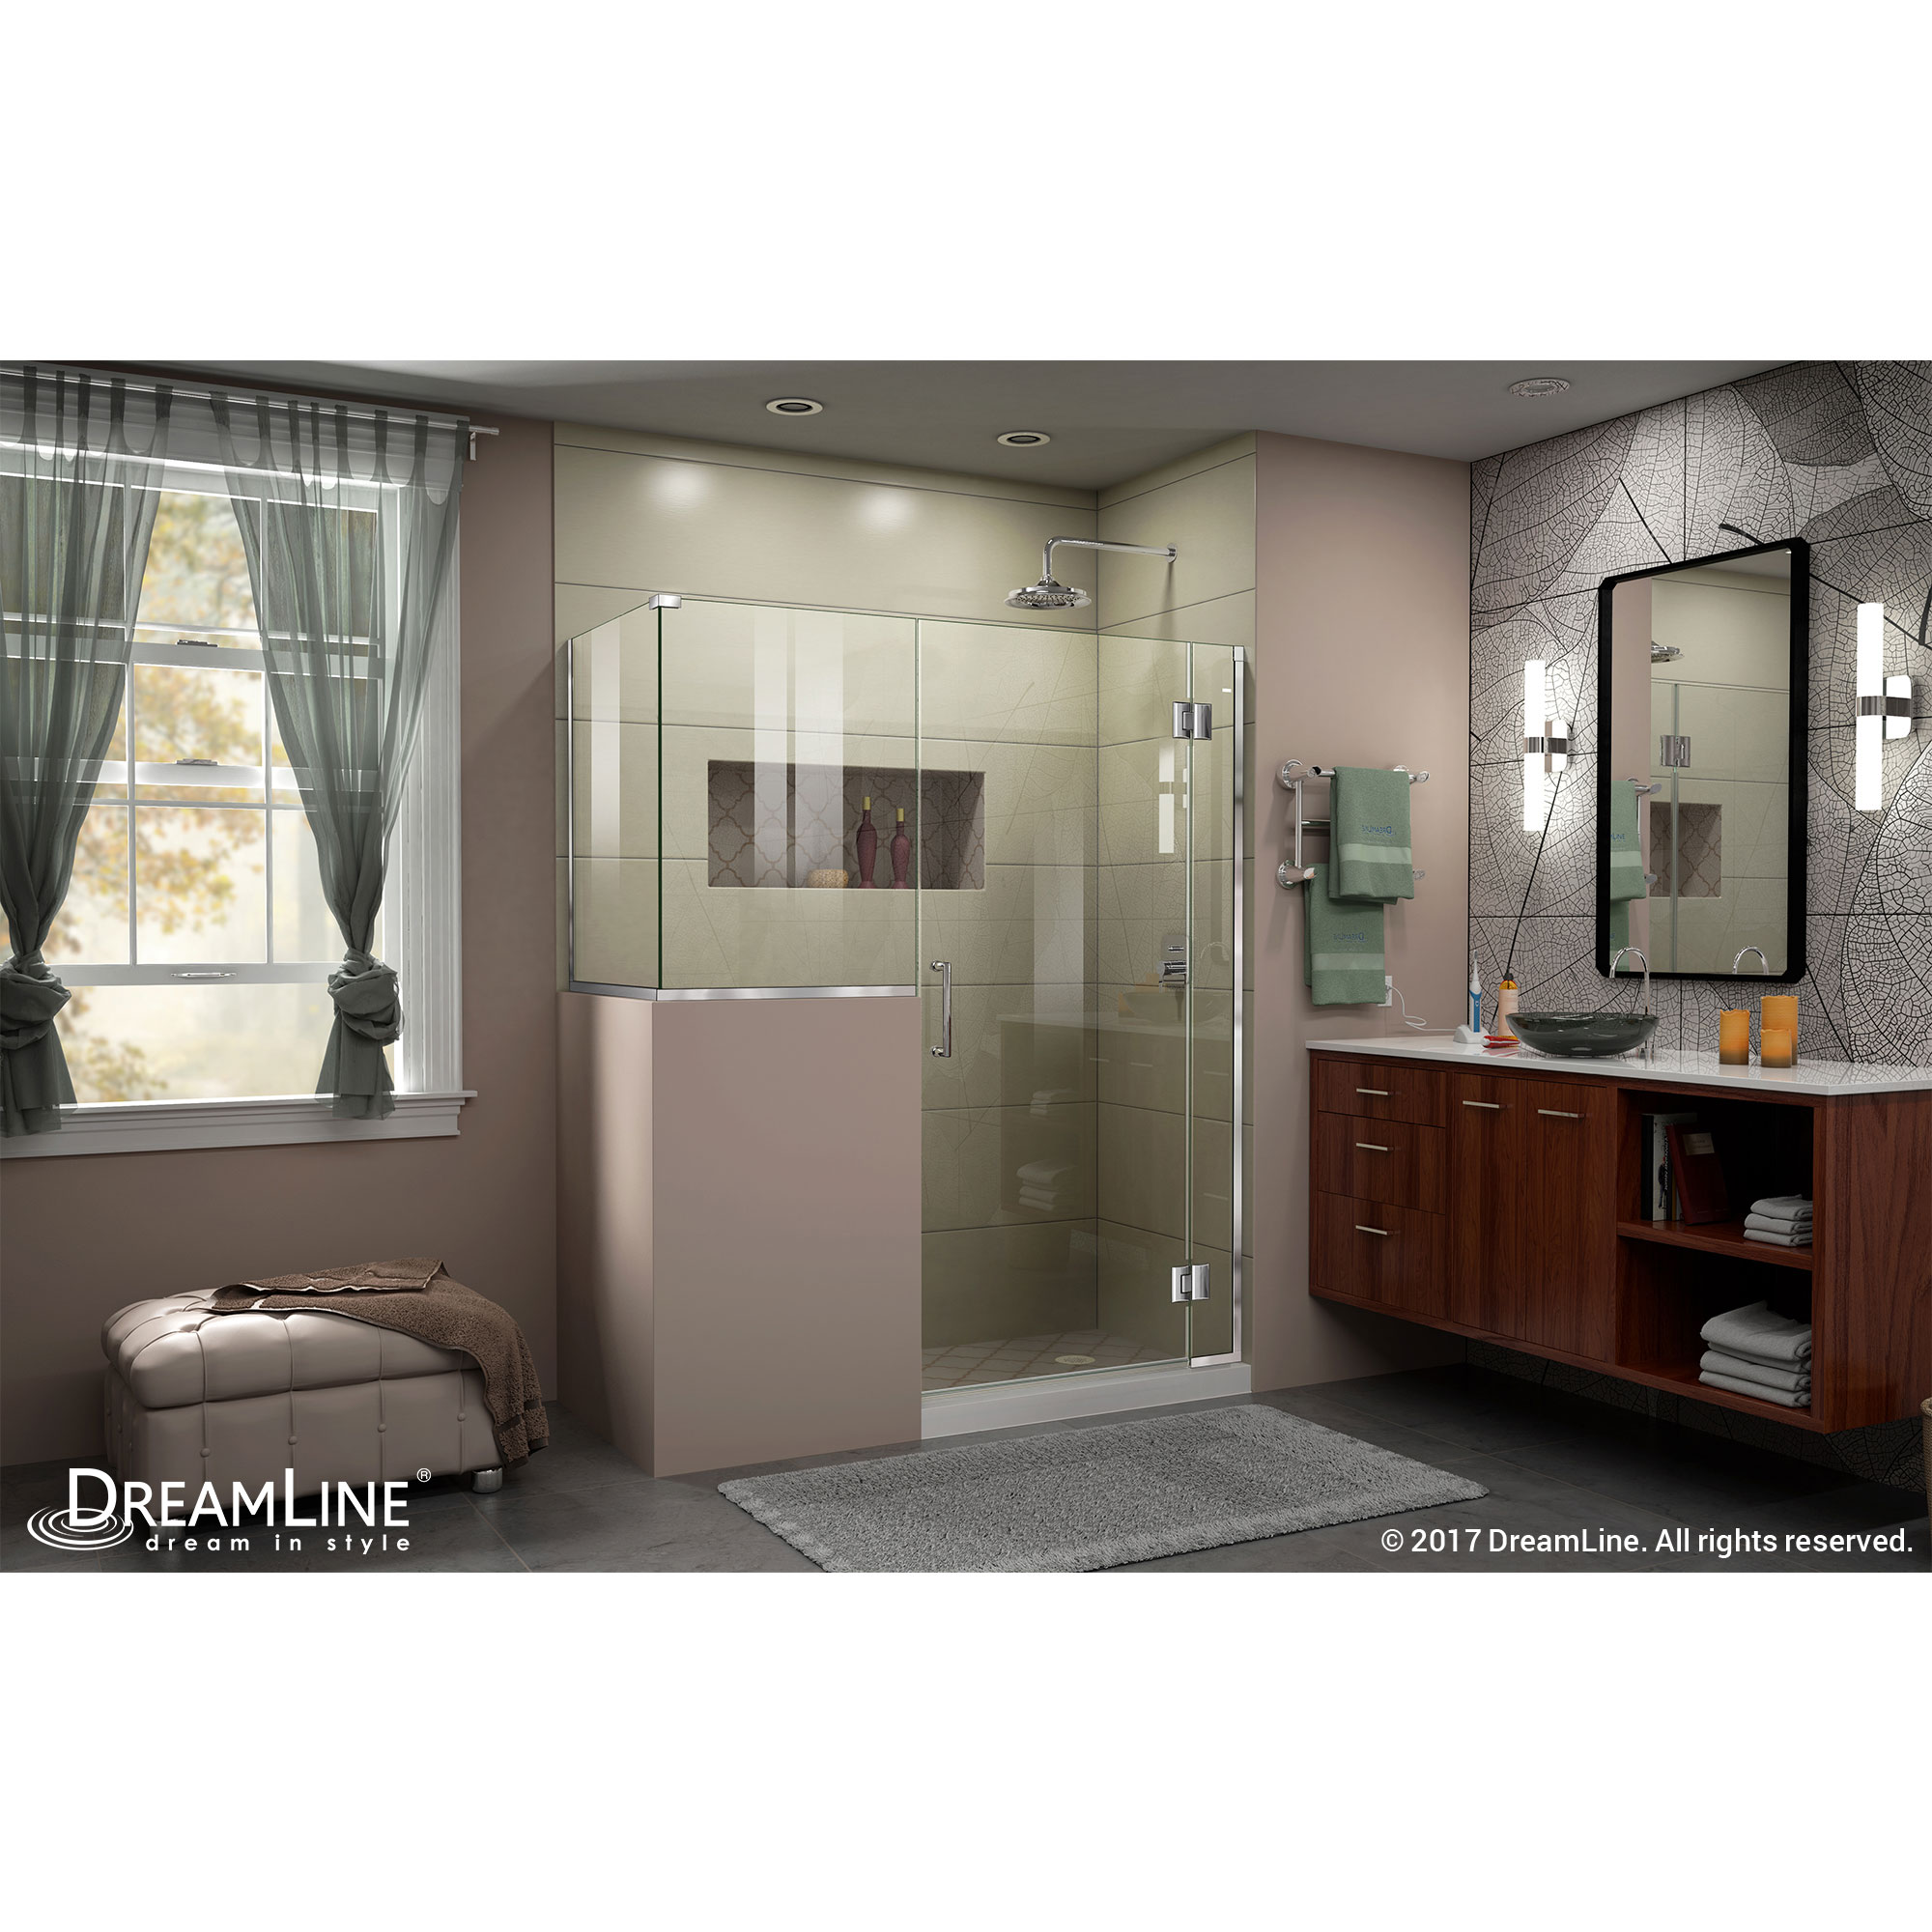 DreamLine Unidoor-X 60 in. W x 36 3/8 in. D x 72 in. H Frameless Hinged Shower Enclosure in Chrome